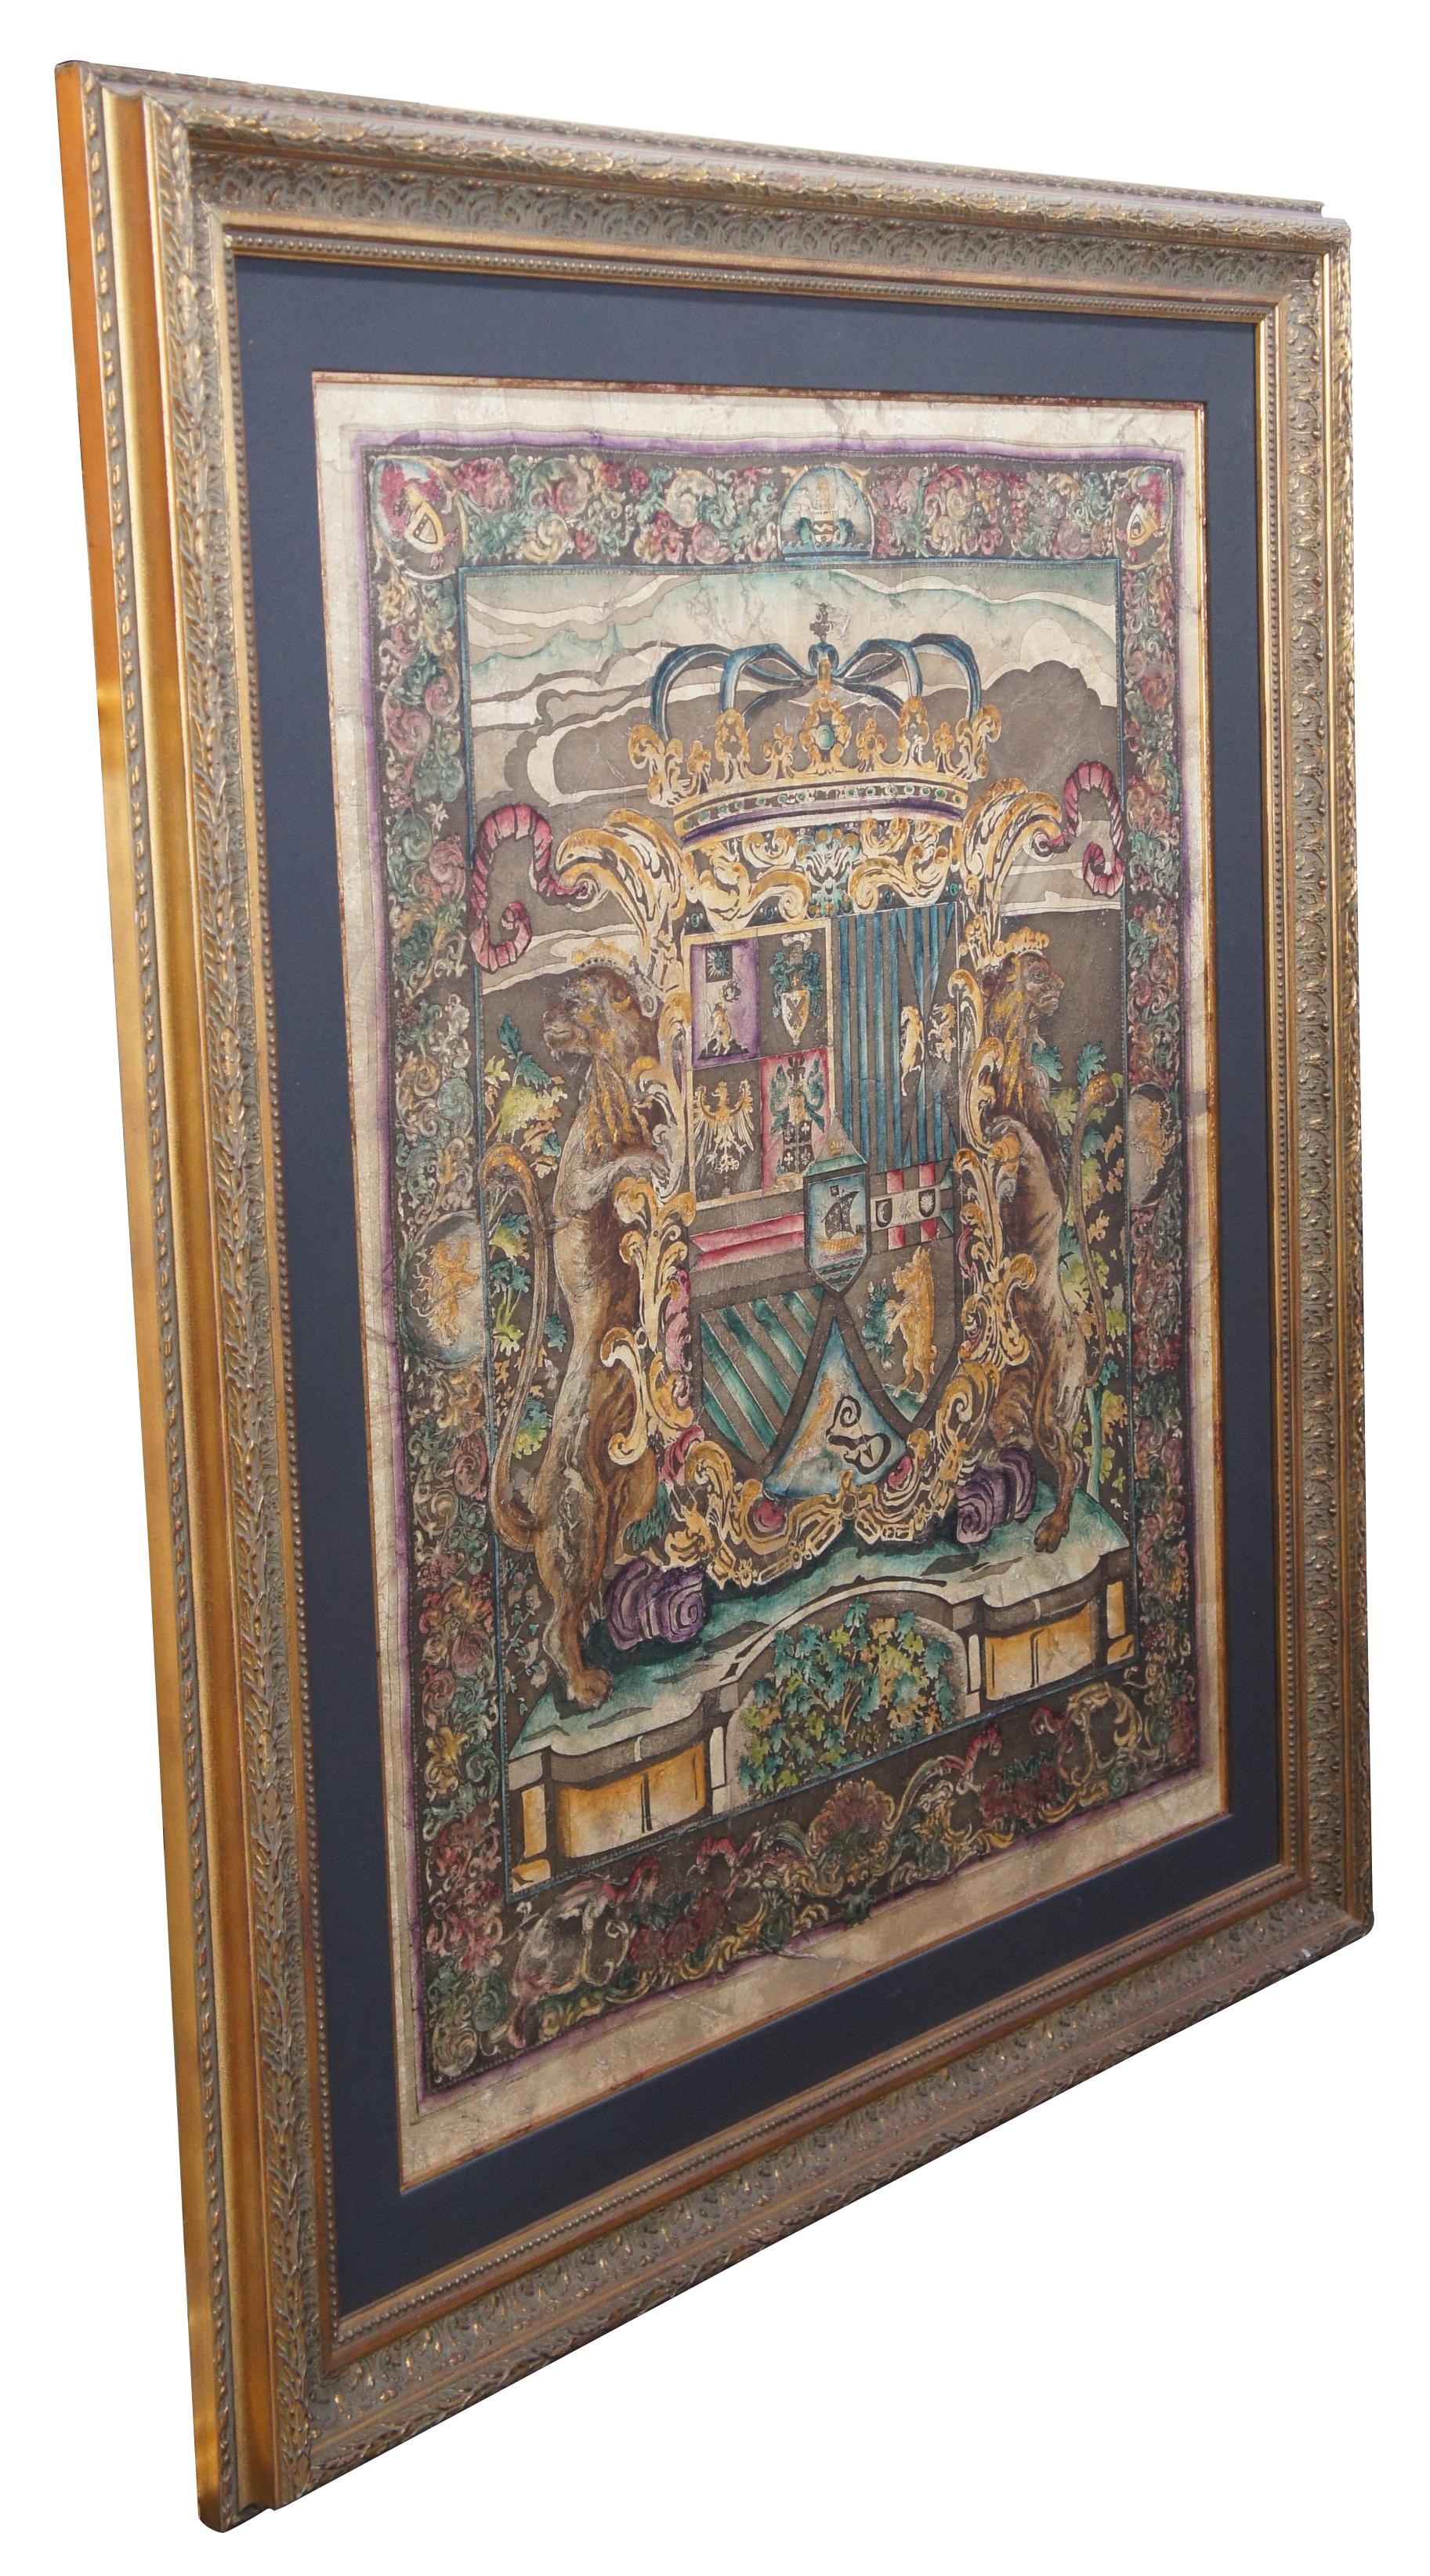 Buckingham Crest Etching on canvas by Liz Jardine, circa 1992. A large format art with an amazing frame. Features a heraldic crest or shield at the center surrounded by lions with crowns. The crest has various crests within it and includes a